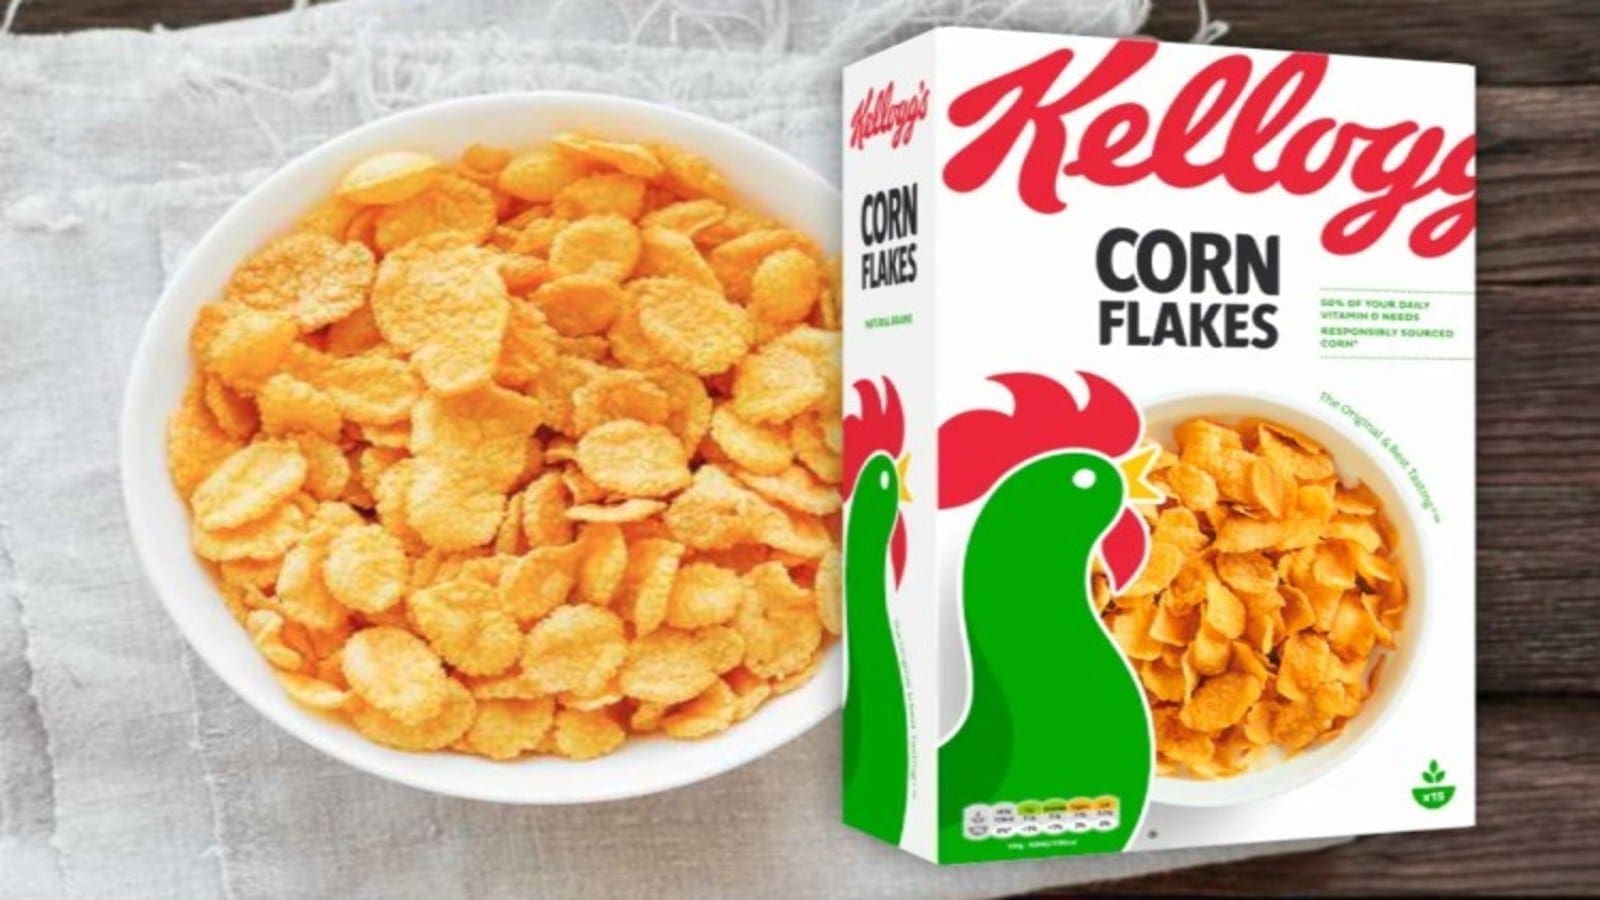 Kellogg’s net sales grow in Q2 as Treehouse suffers from decreased demand for private label